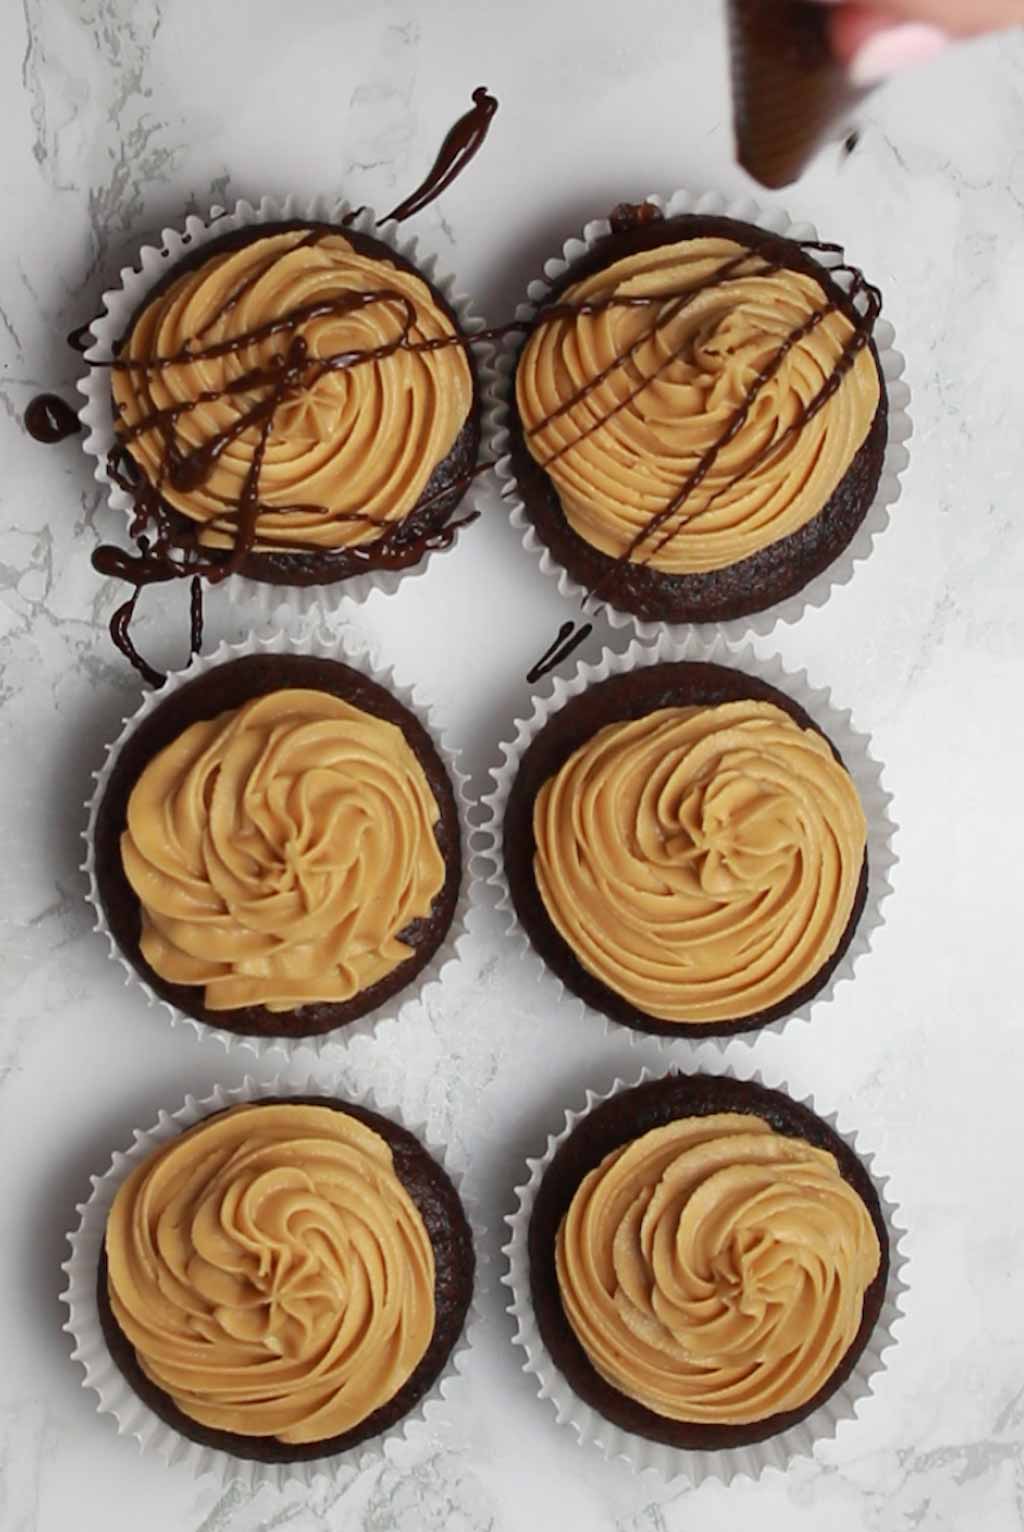 Drizzling Chocolate Over The Cupcakes